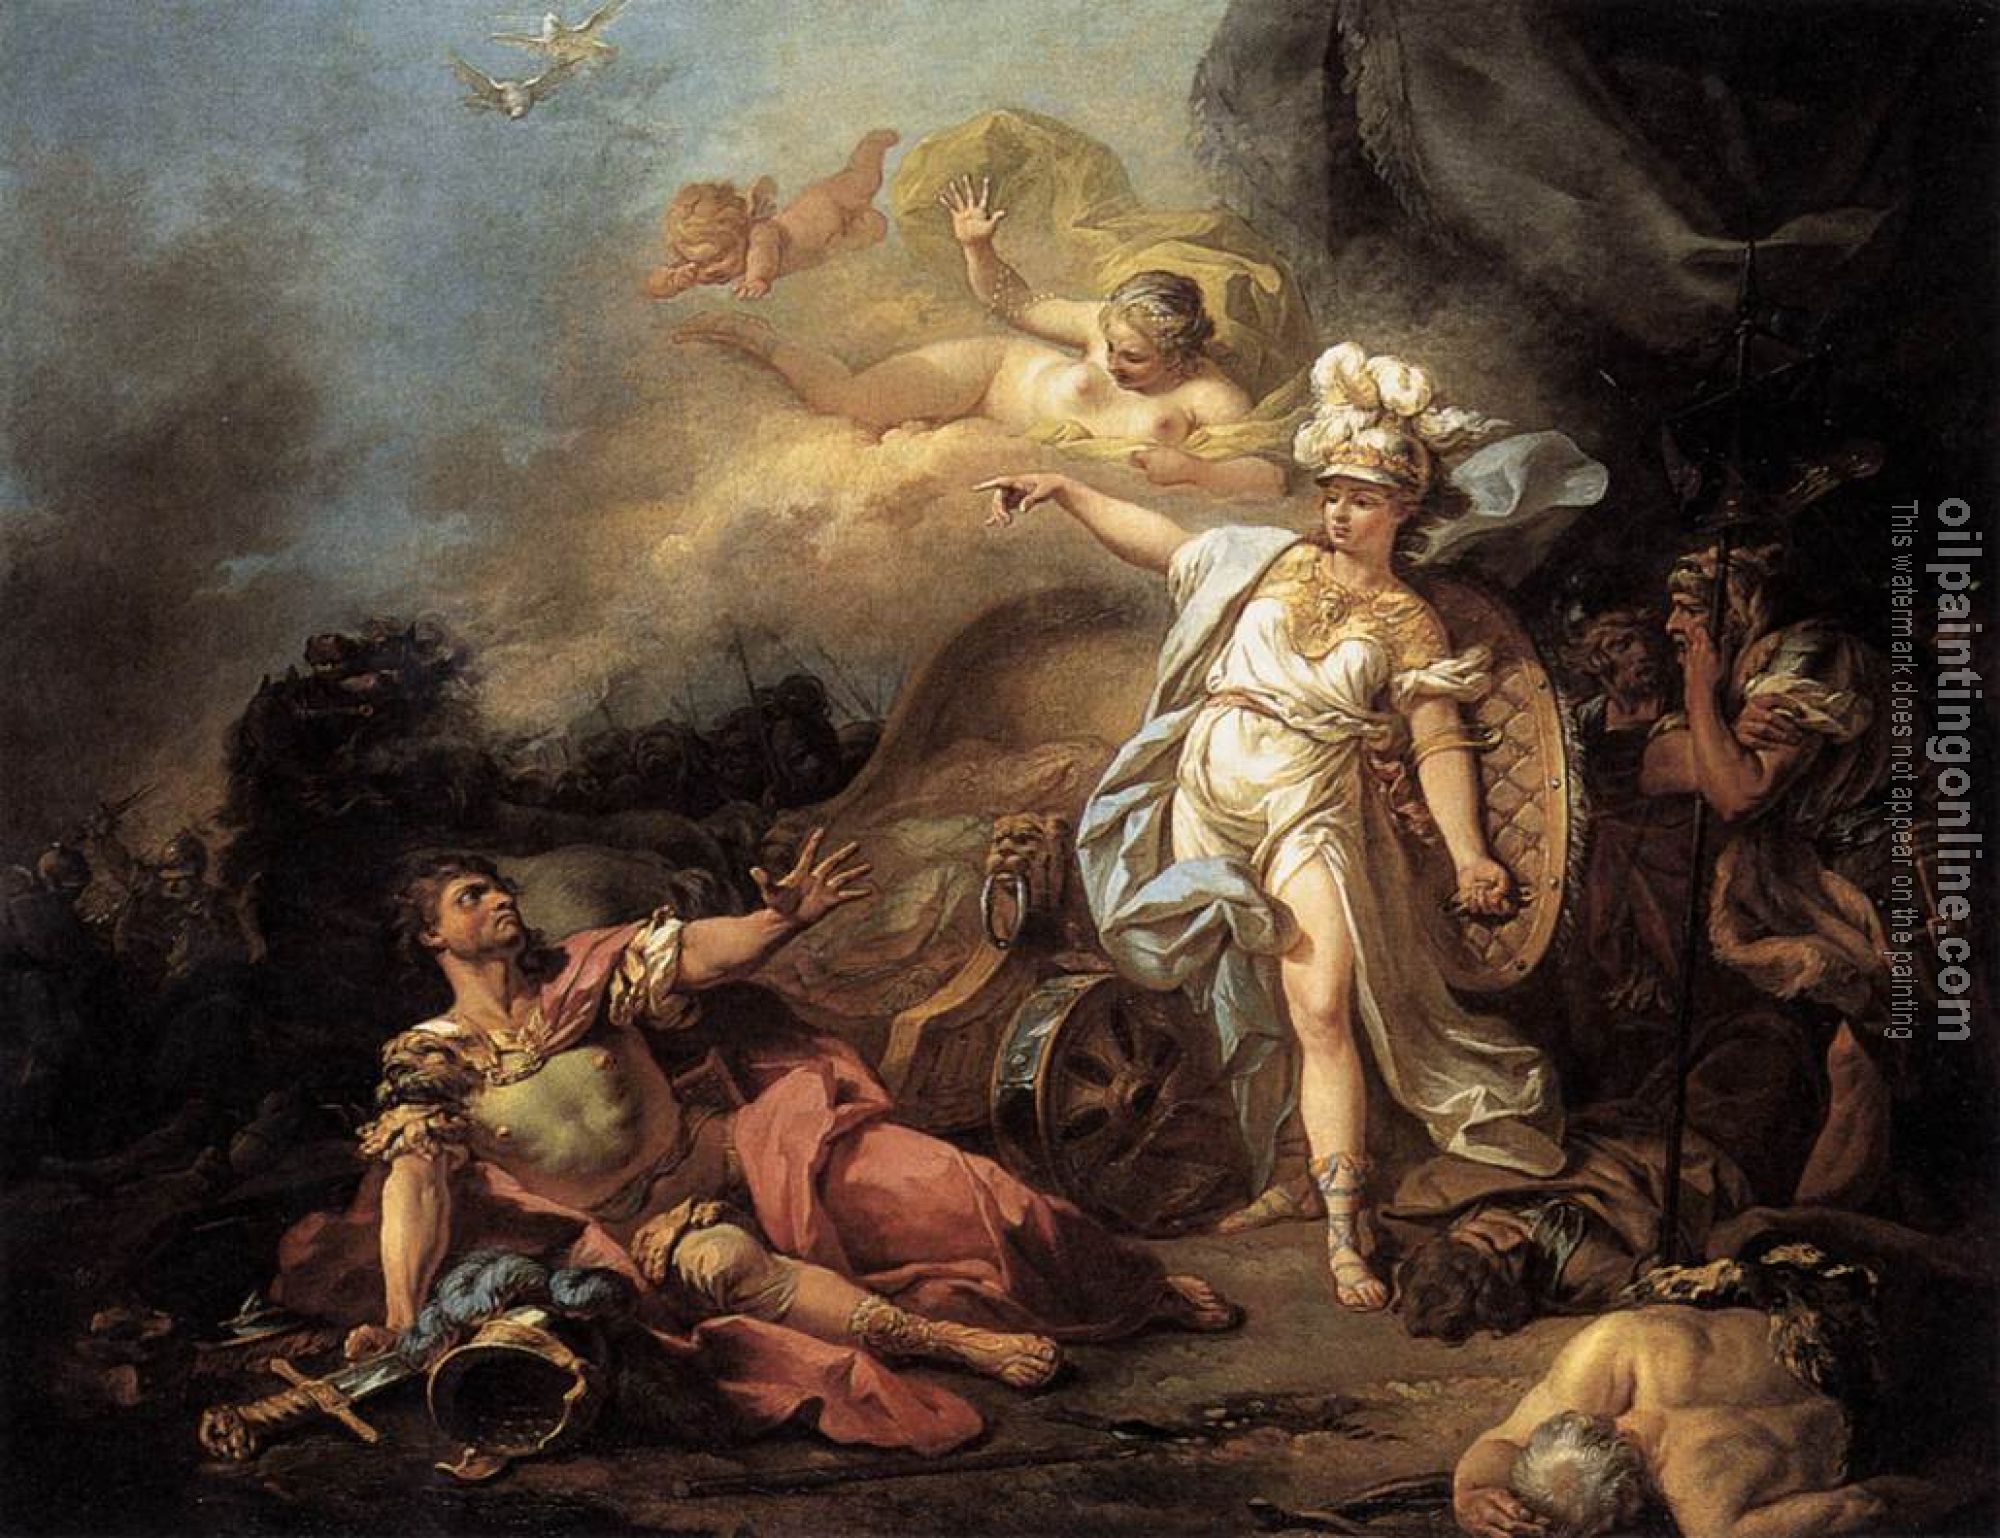 David, Jacques-Louis - The Combat of Mars and Minerva